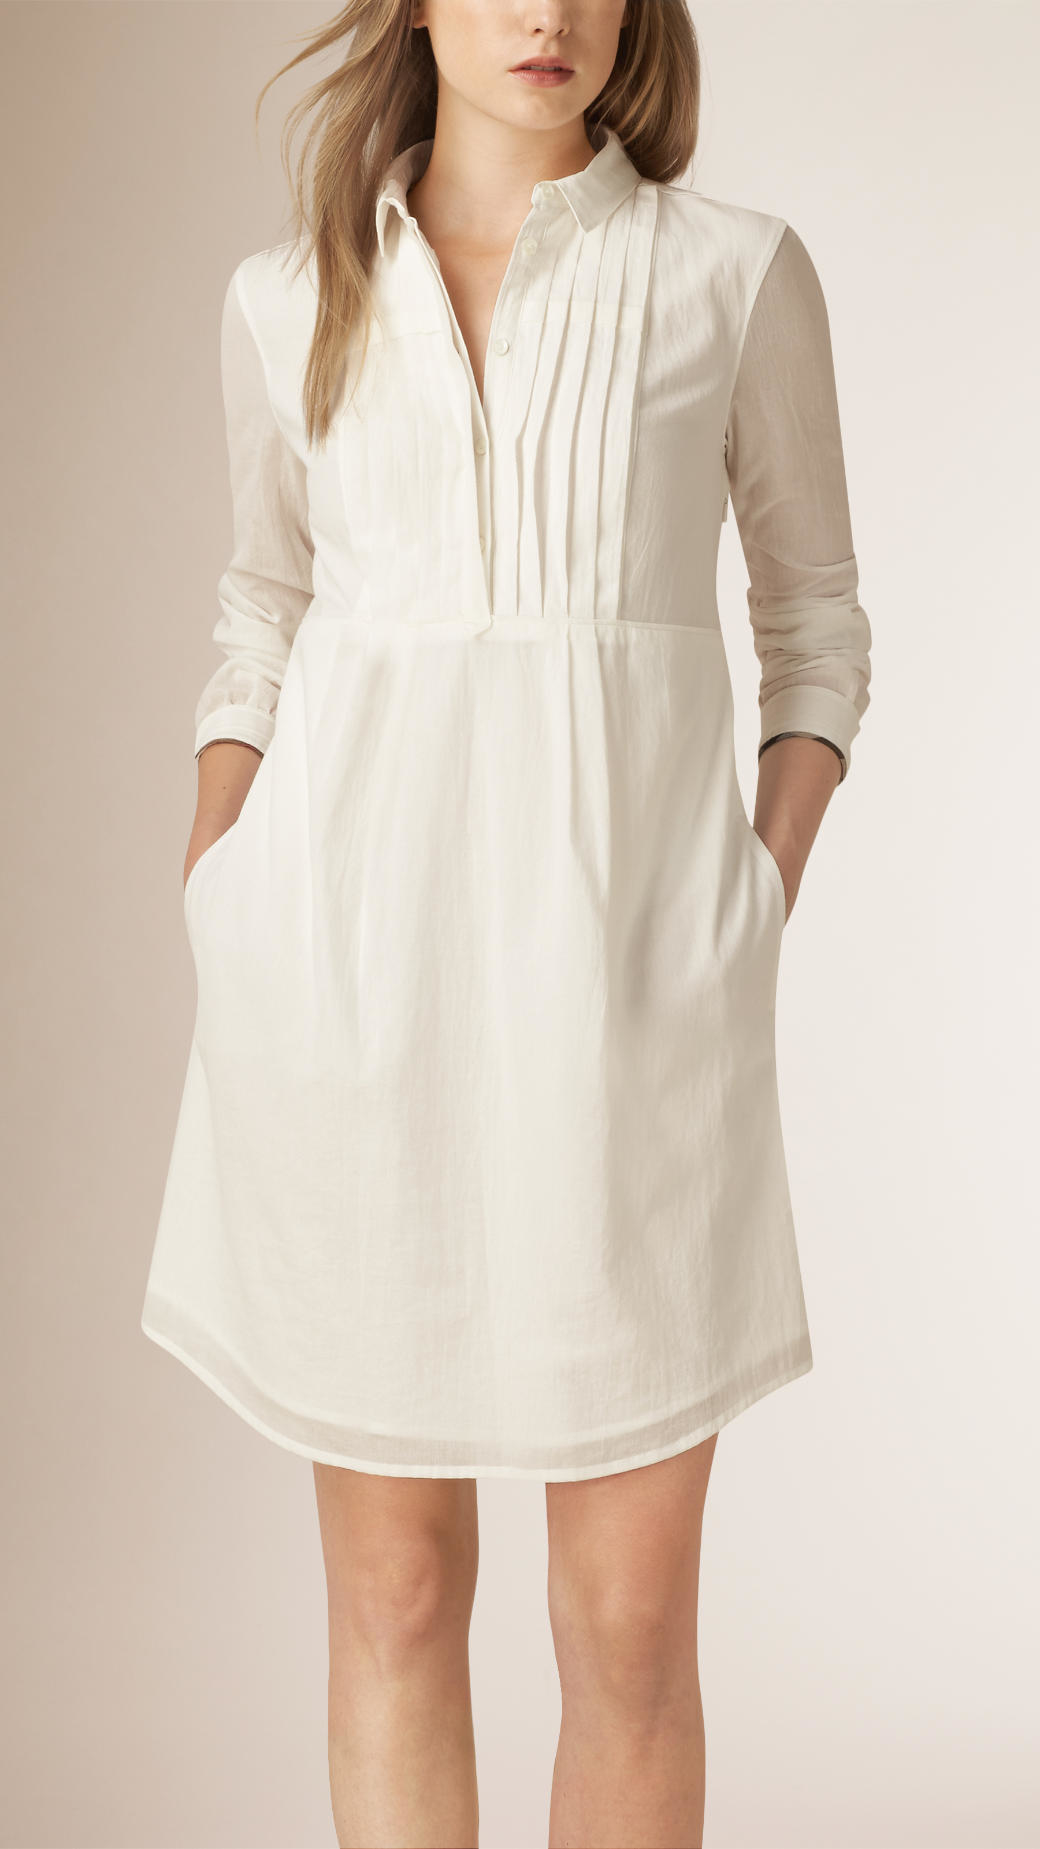 Lyst Burberry Pleat  Detail Cotton Shirt  Dress  in White 